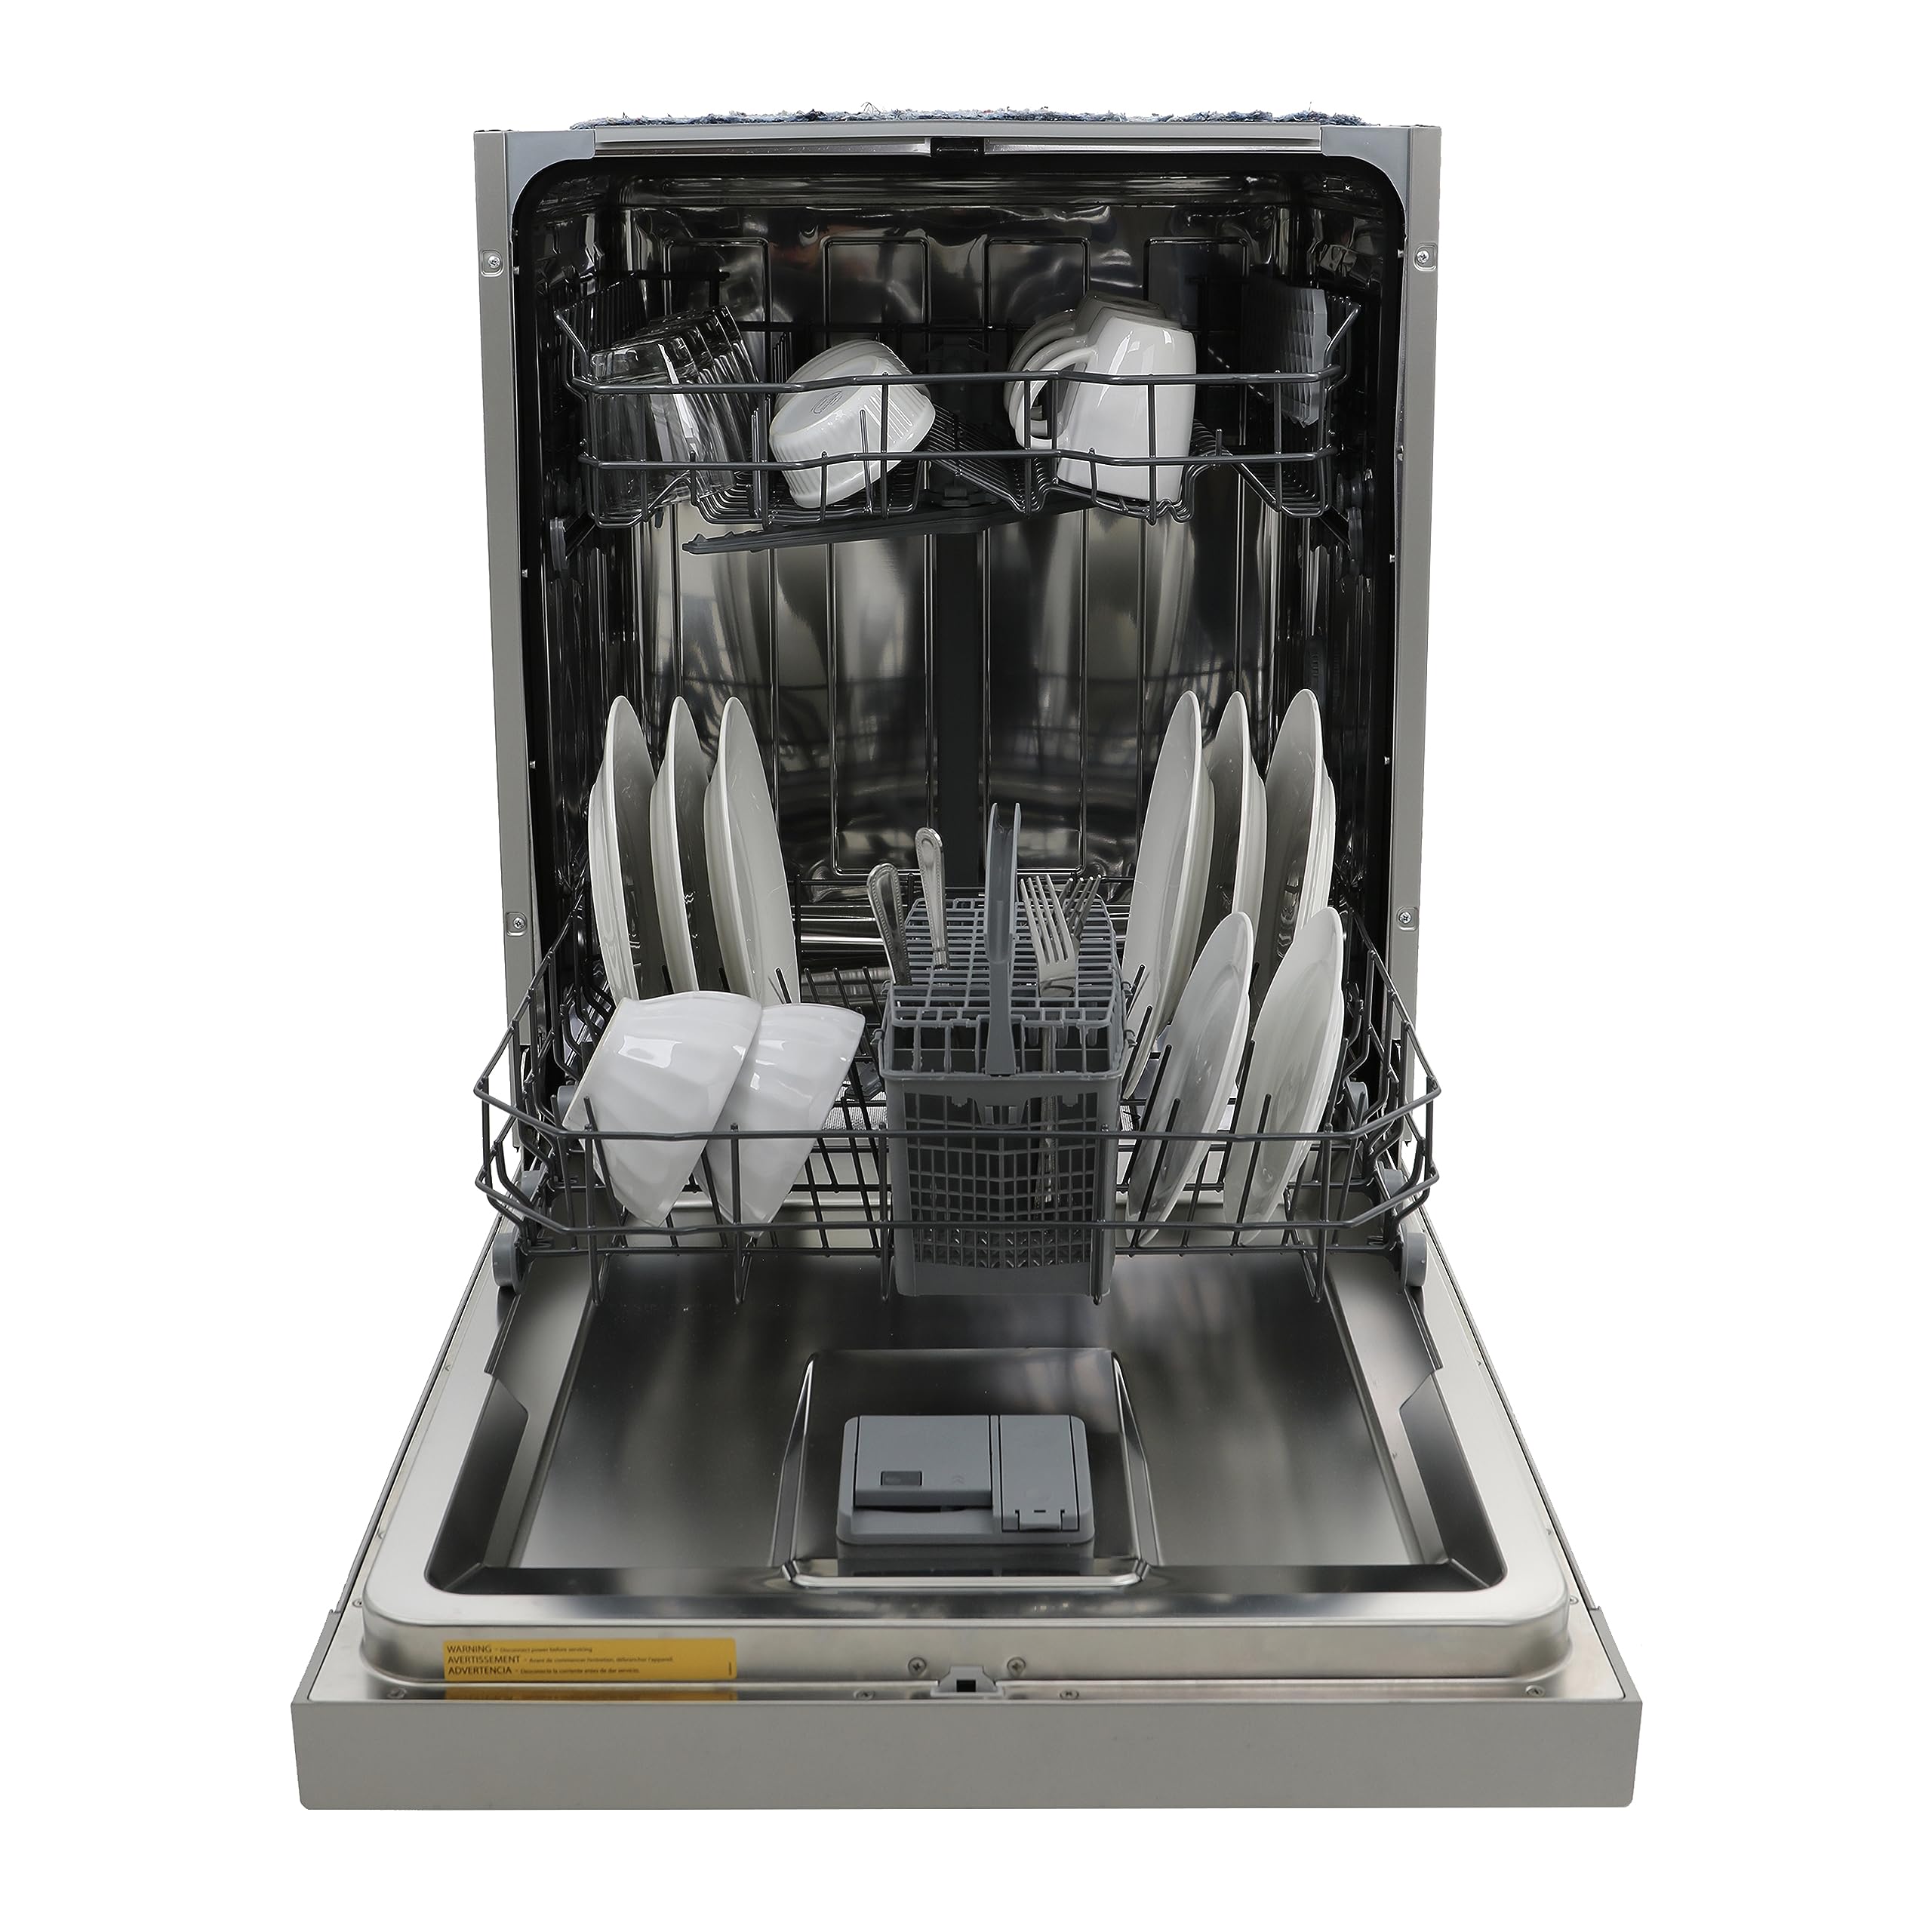 West Bend WB120BDWVSS Dishwasher 24-Inch Built in with 3 Wash Options and Automatic Cycles, Stainless Steel Construction with Electronic Control LED Display, Low Noise Rating, Metallic